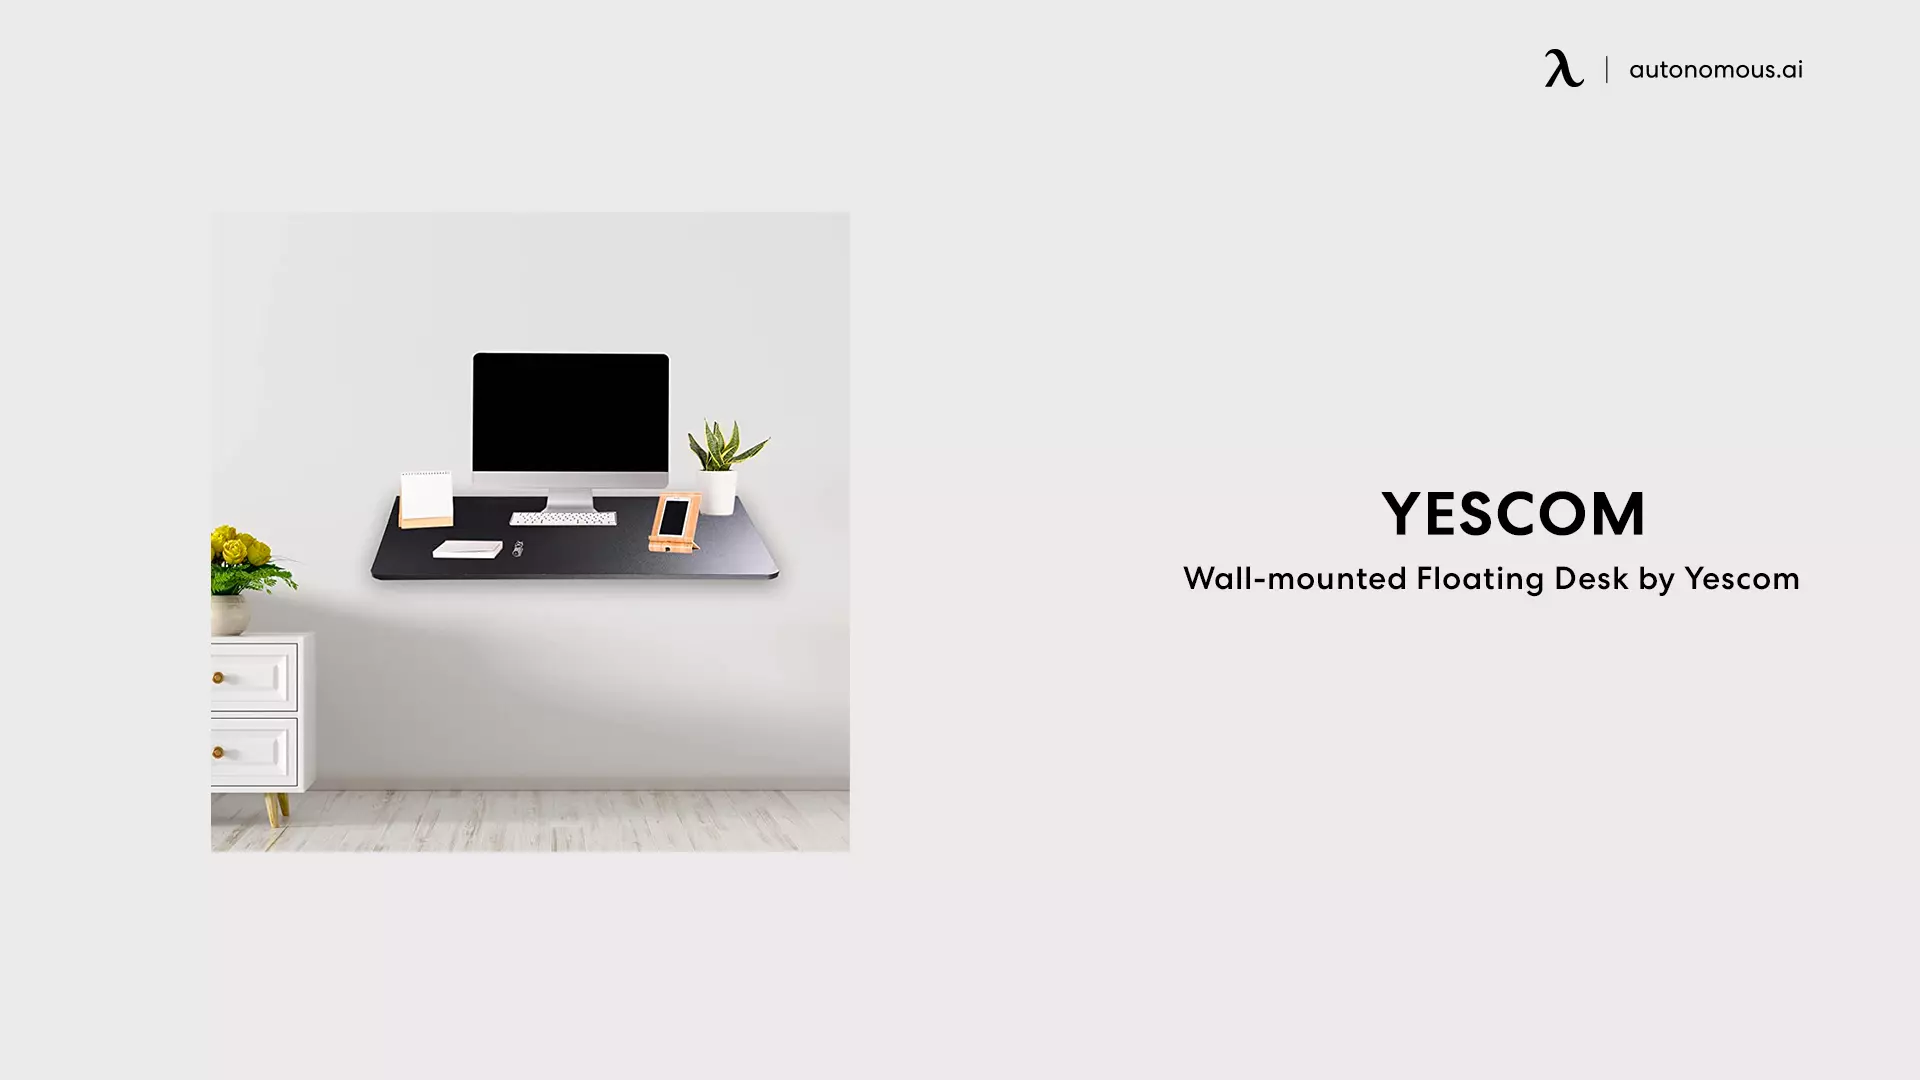 Wall-mounted Floating Desk by Yescom